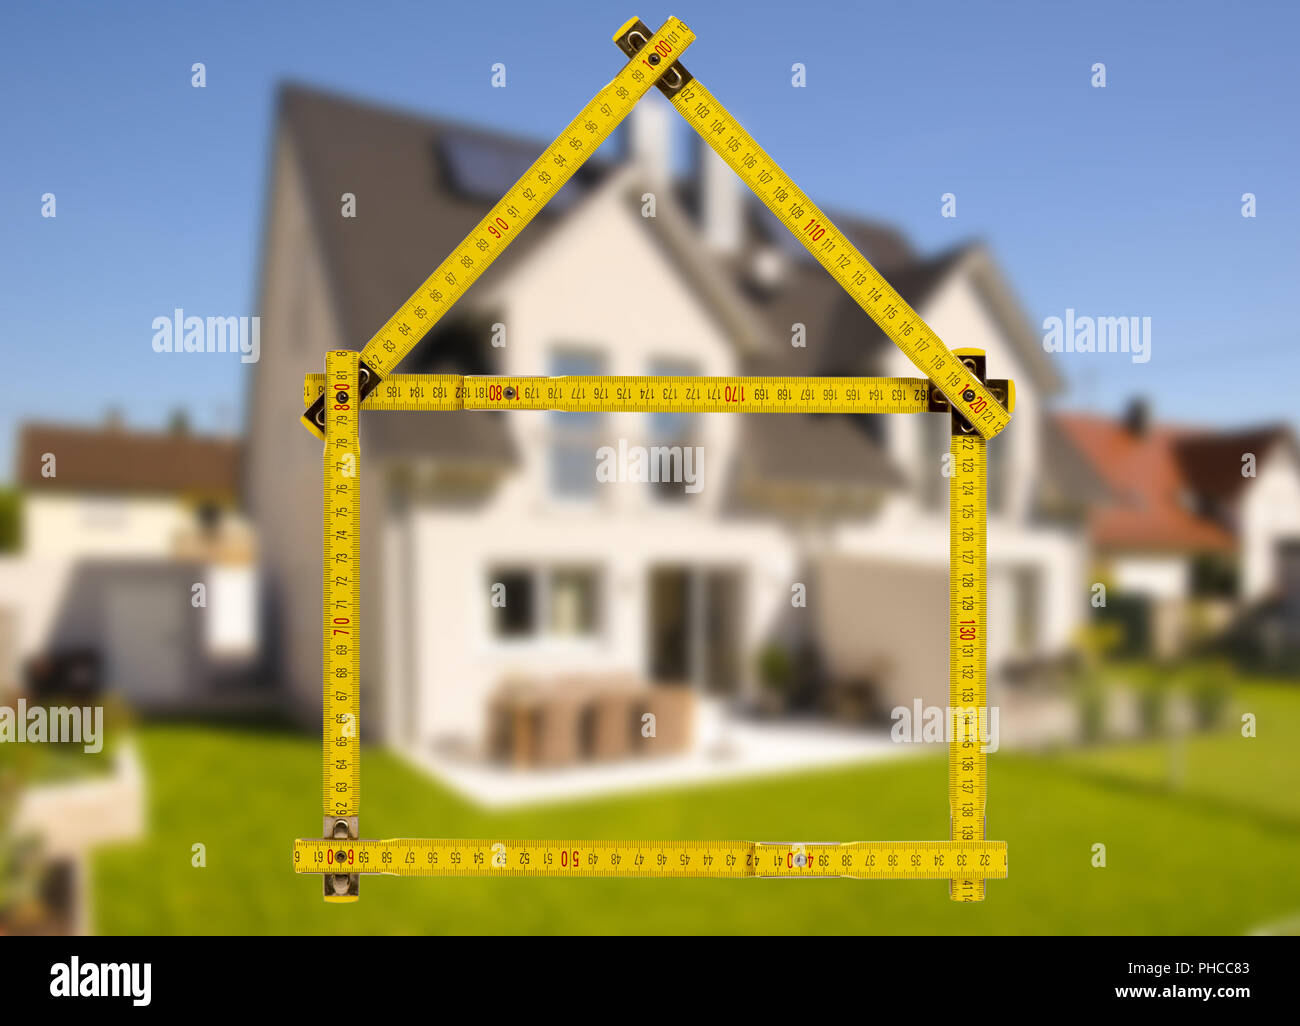 yardstick as symbol for construction of residential house Stock Photo